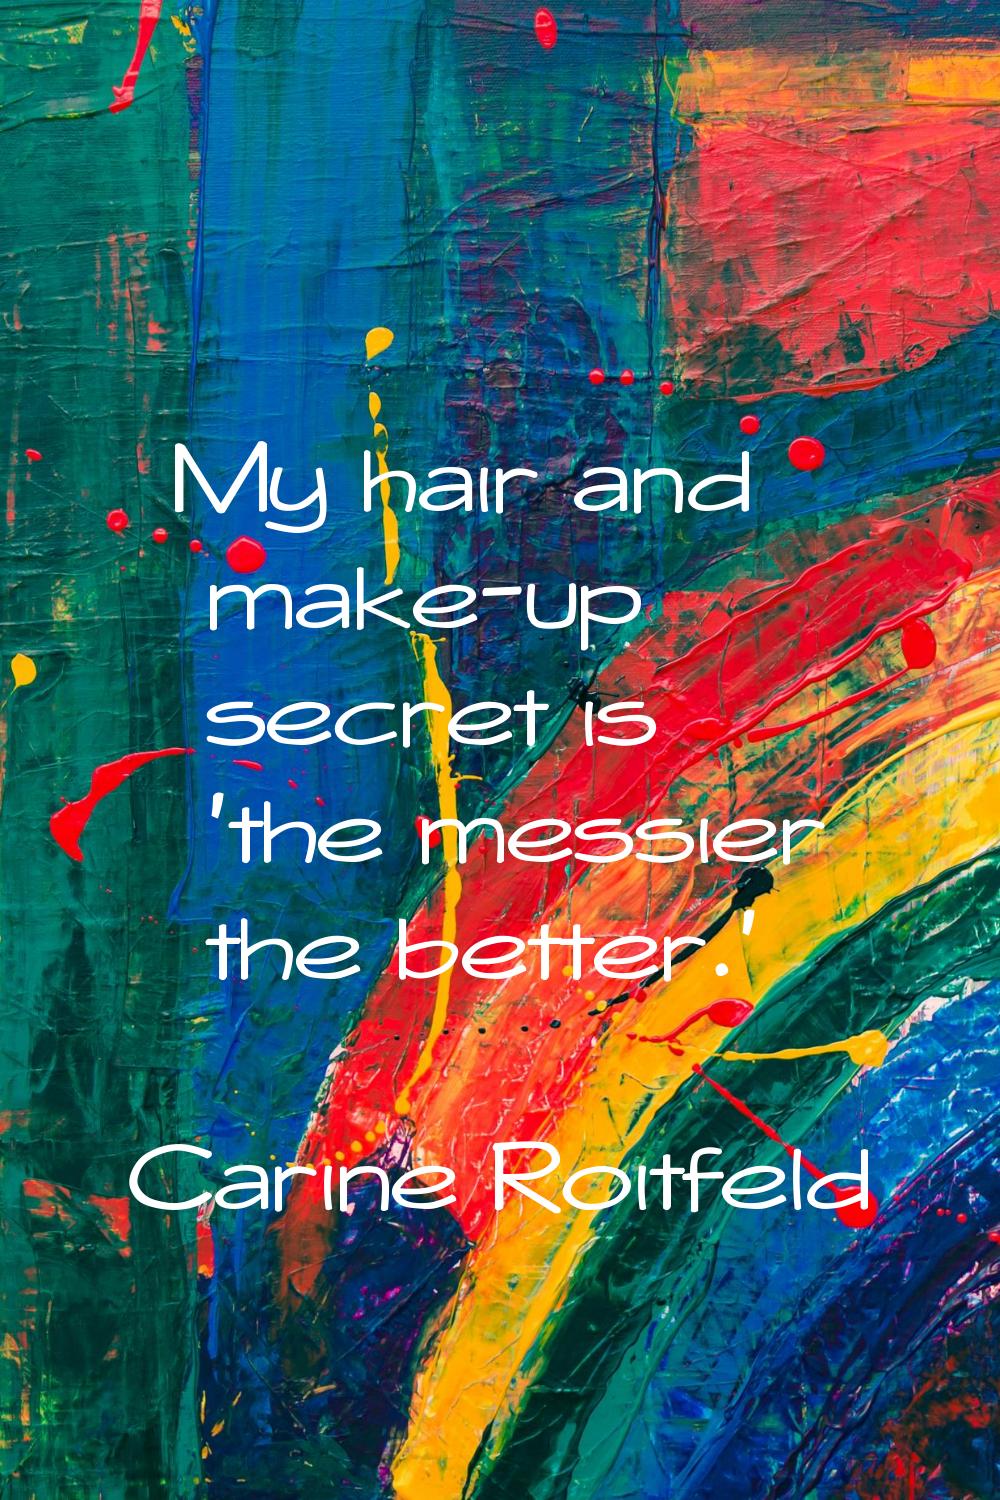 My hair and make-up secret is 'the messier the better.'